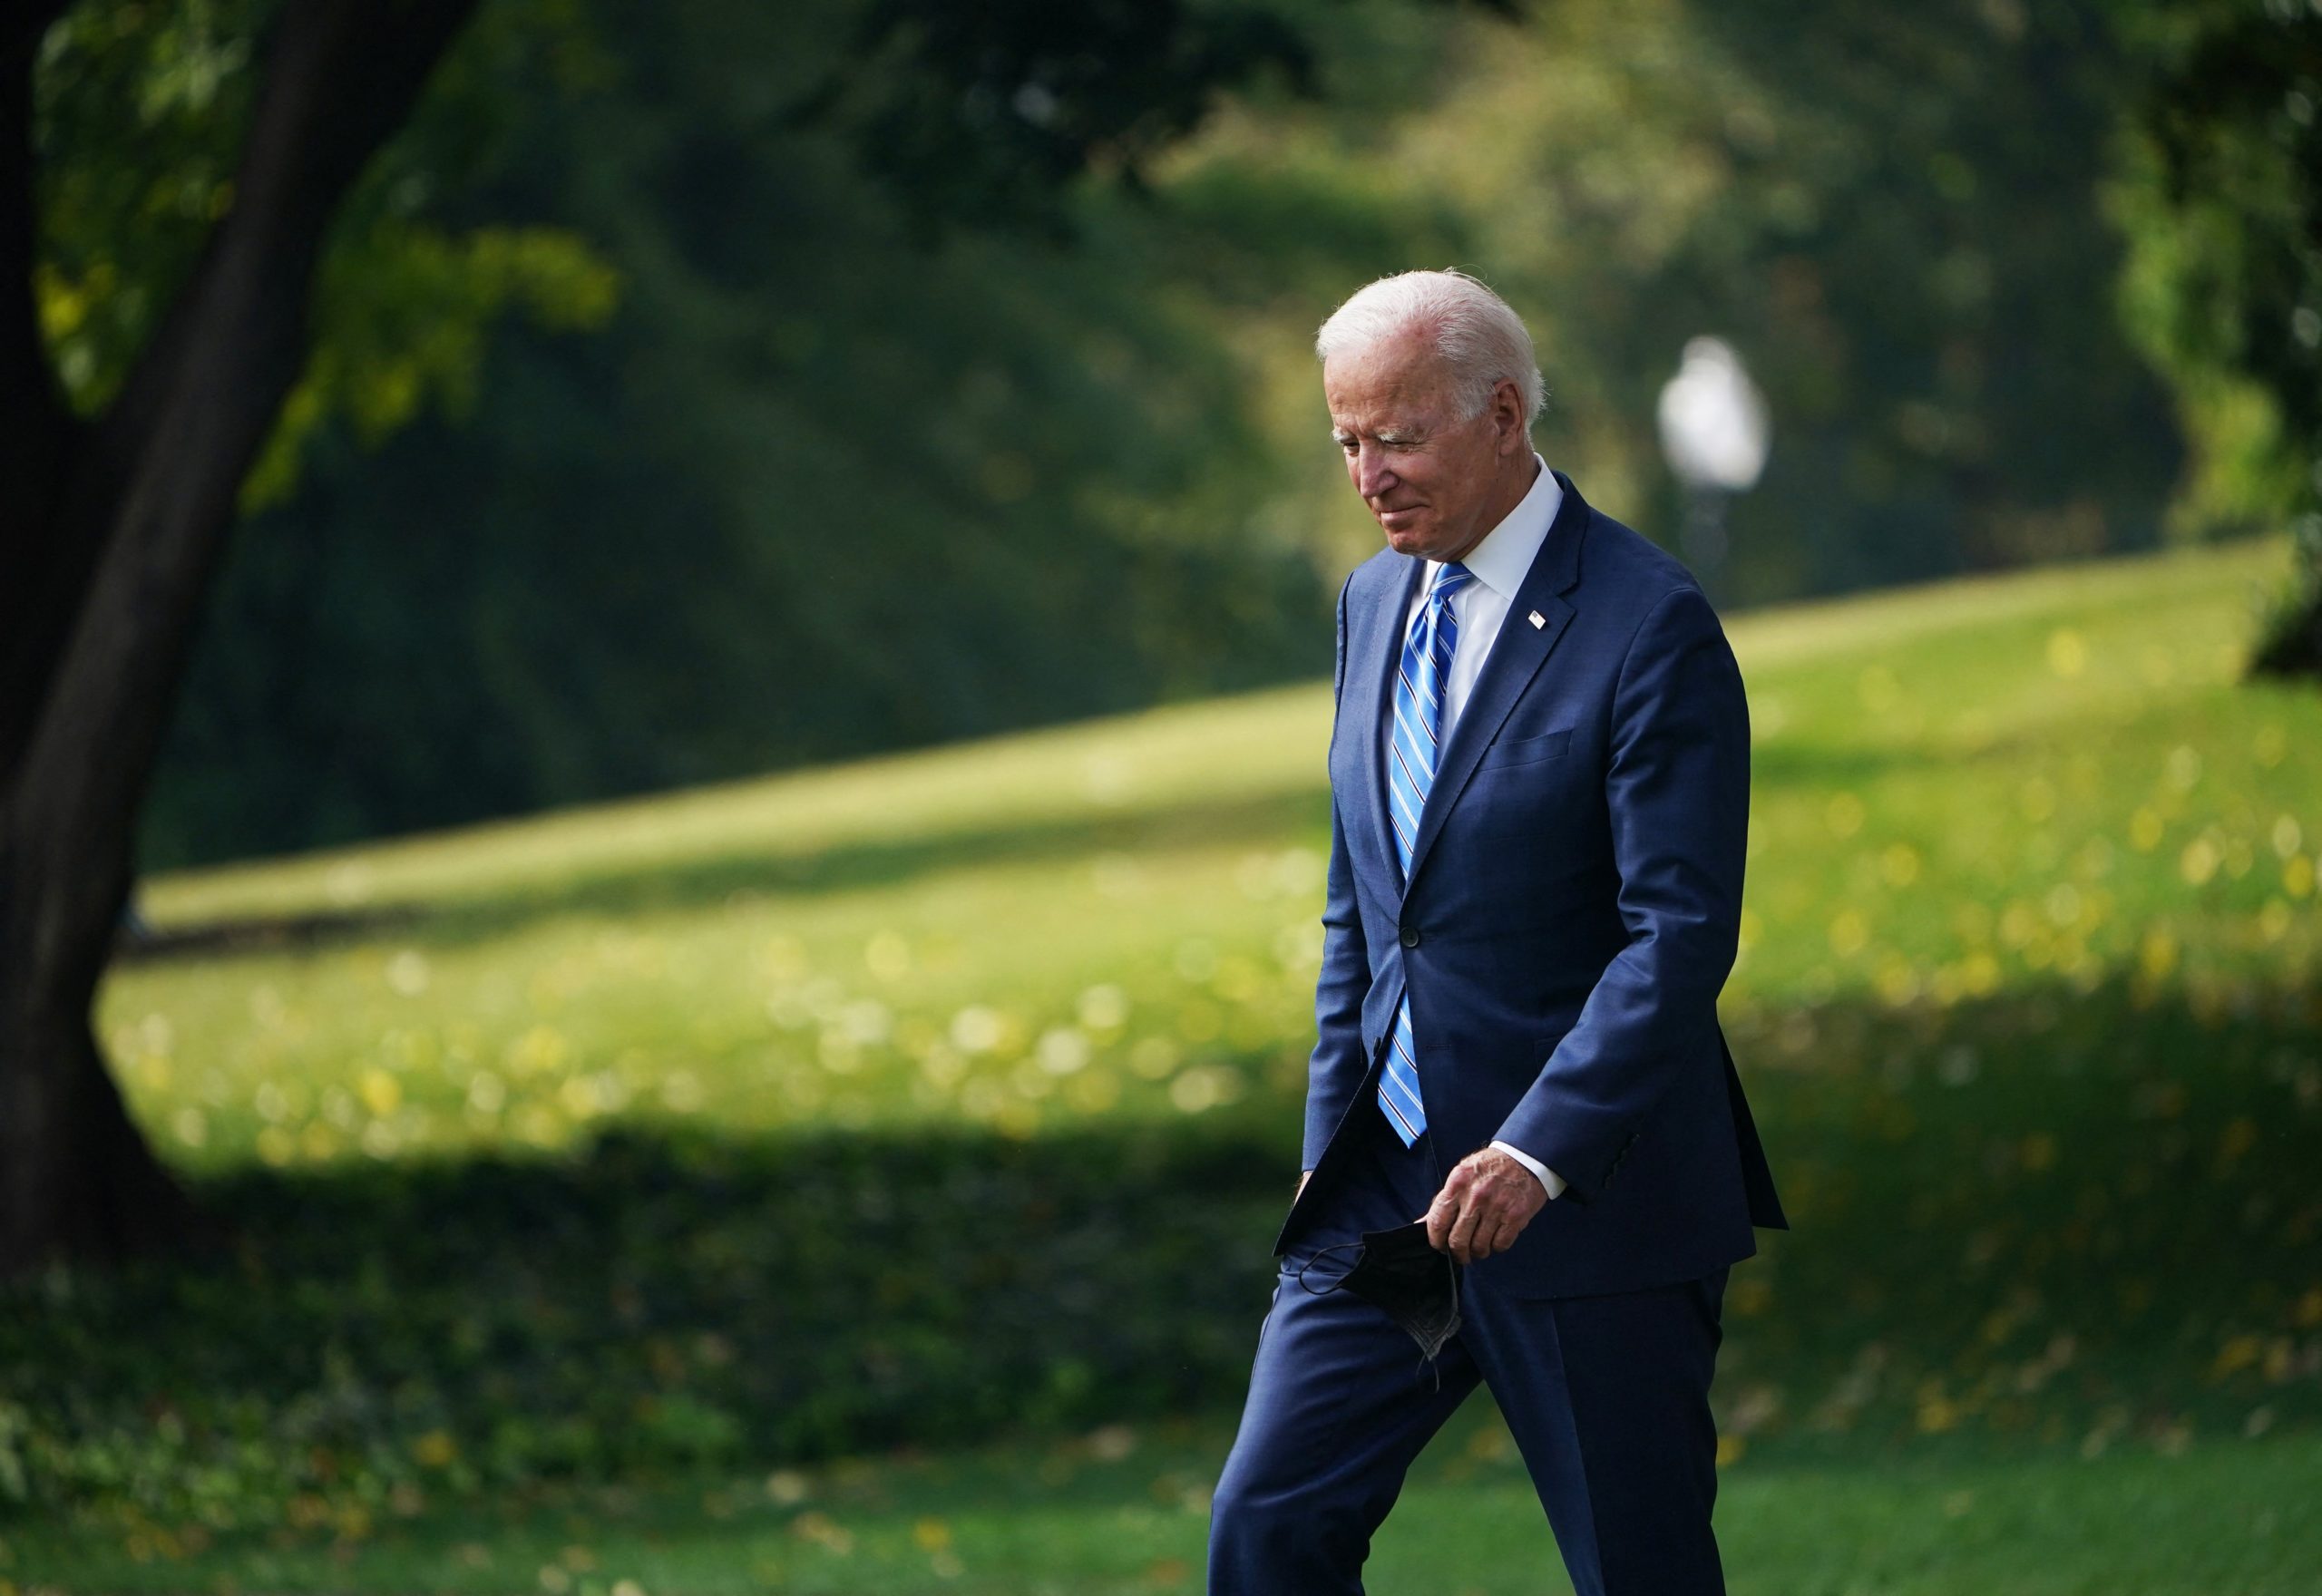 US President Joe Biden departs the White House in Washington, DC, from the South Lawn, on October 5, 2021. - Biden is travelling to Michigan to speak about his infrastructure bill and Build Back Better agenda. (Photo by MANDEL NGAN / AFP) (Photo by MANDEL NGAN/AFP via Getty Images)